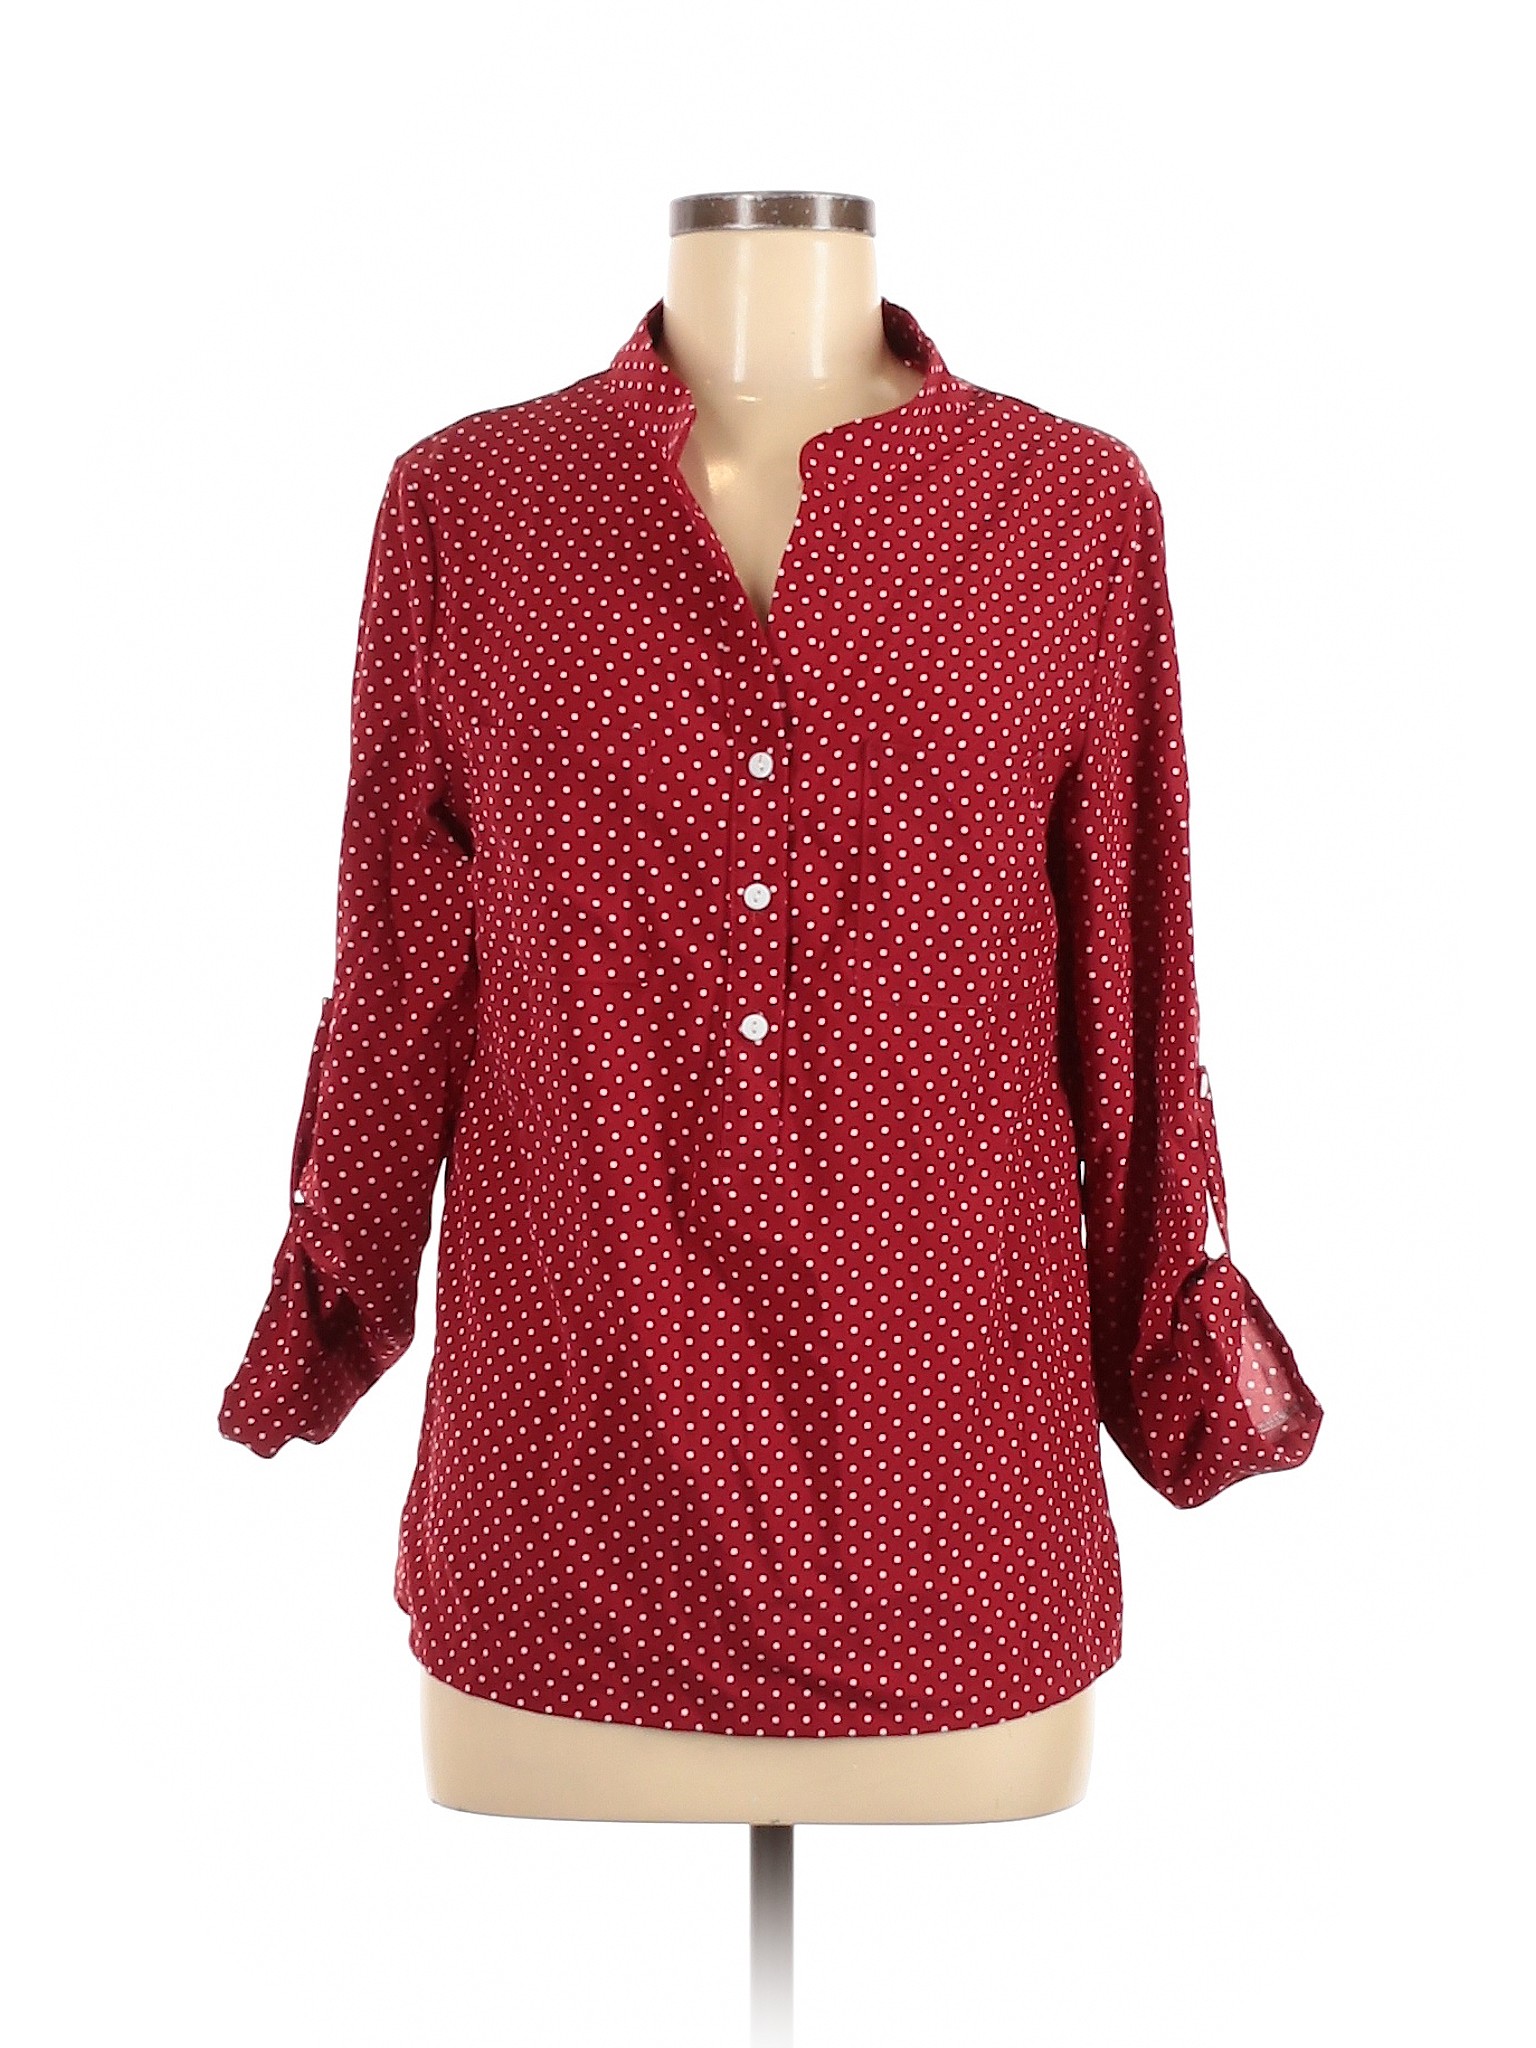 half sleeve red button down shirt for women